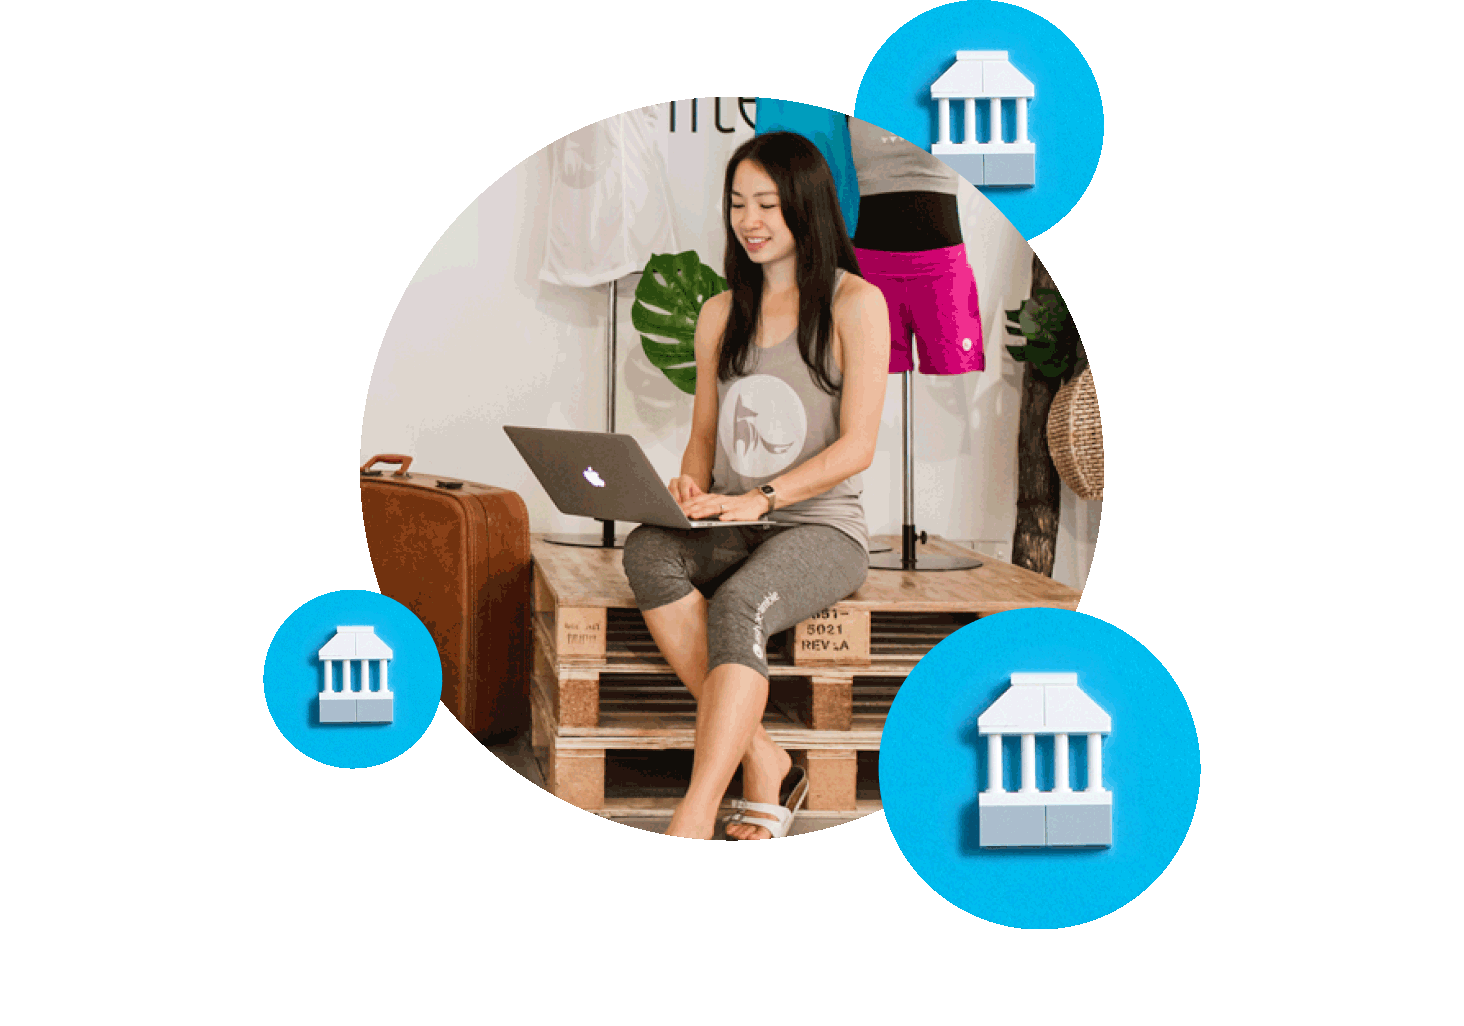 Lady using Xero in circular composition with bank connection iconography